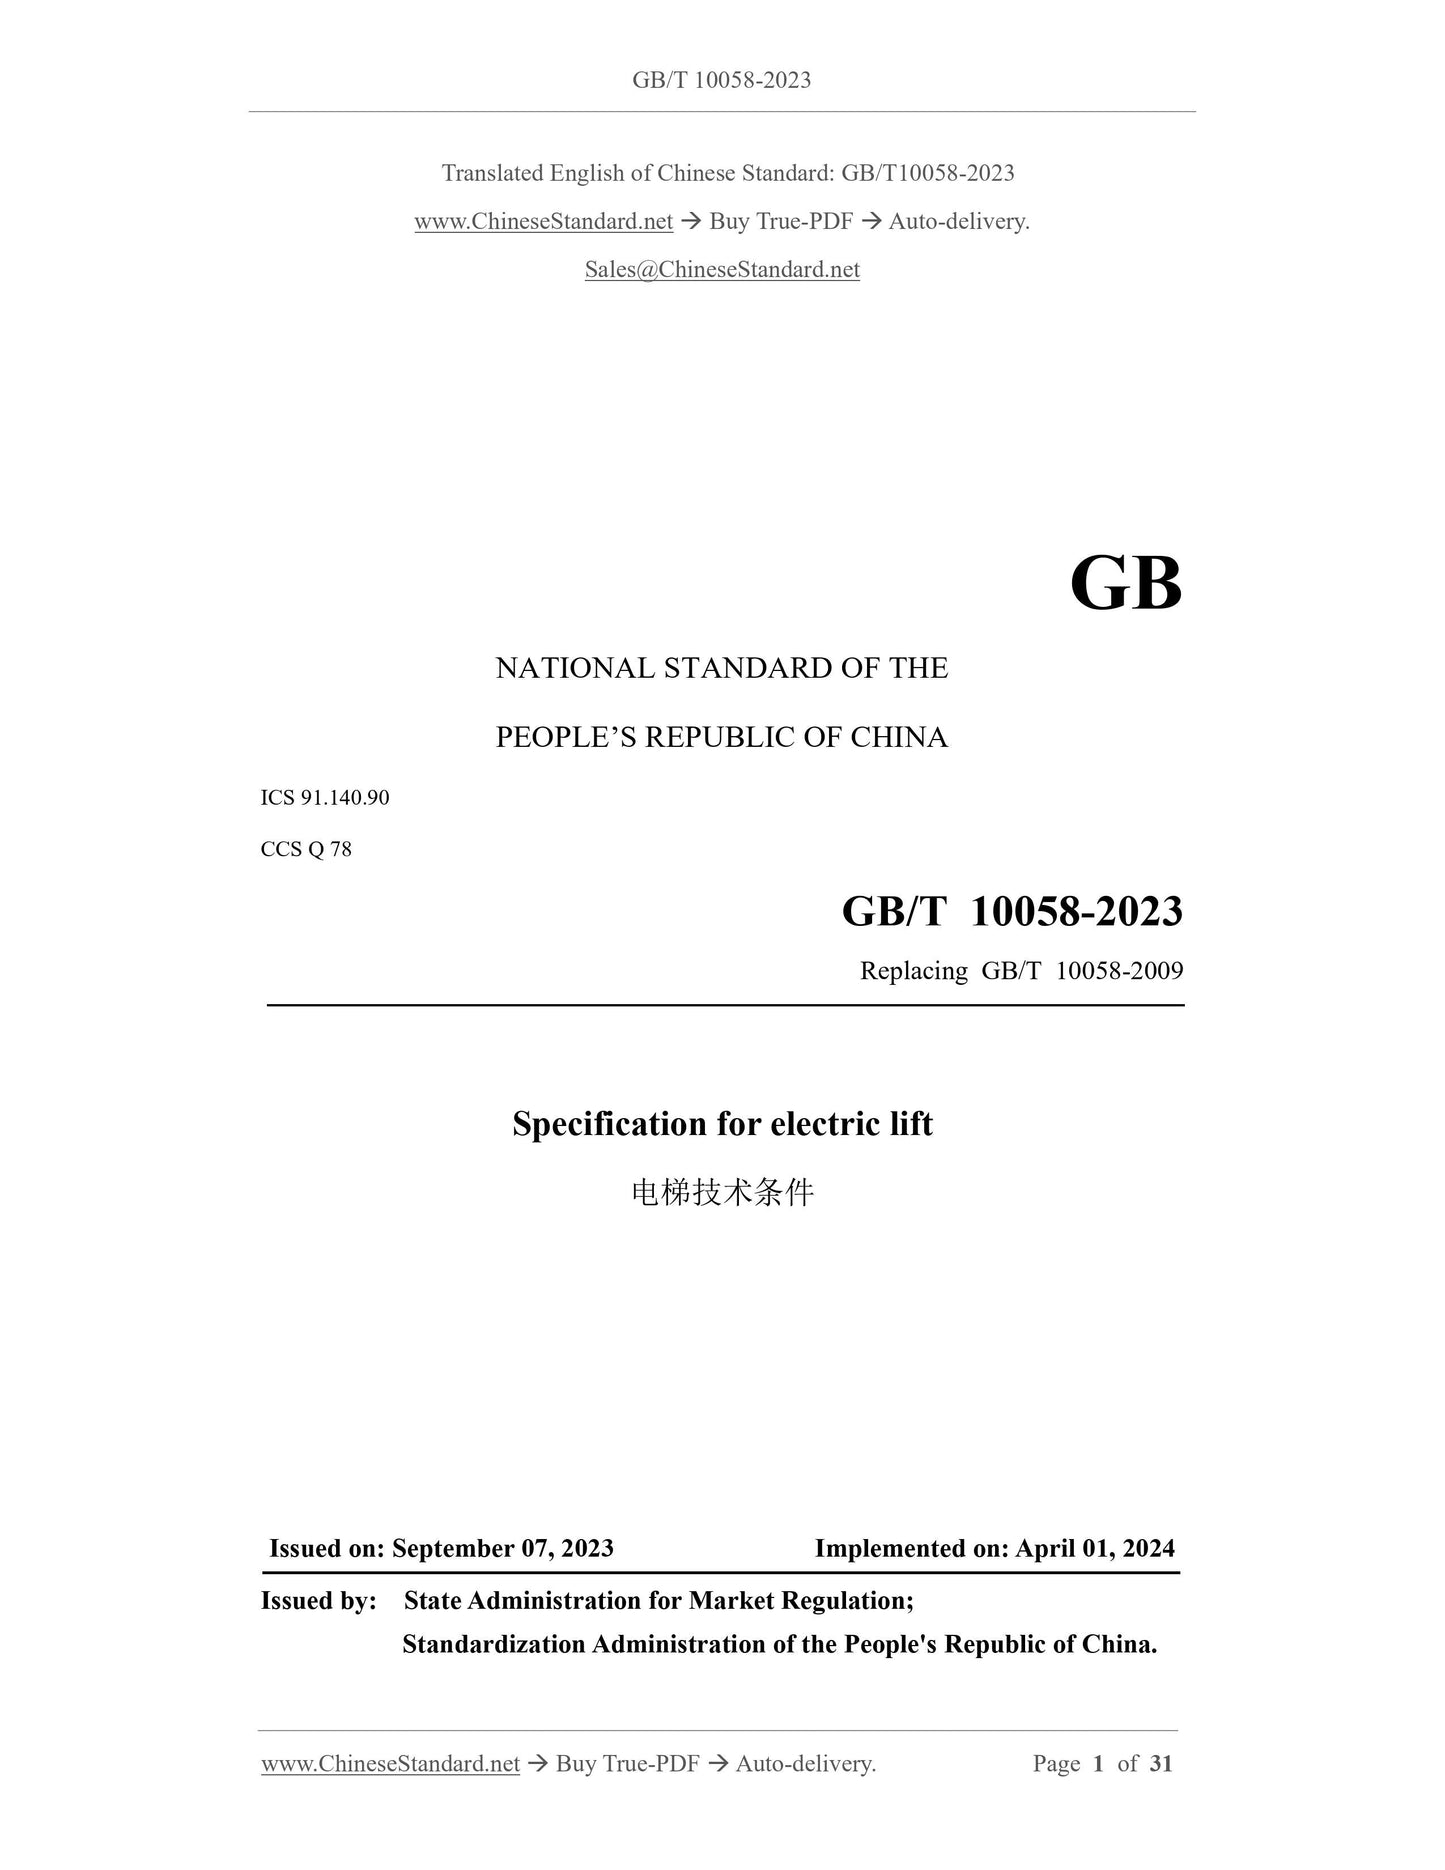 GB/T 10058-2023 Page 1